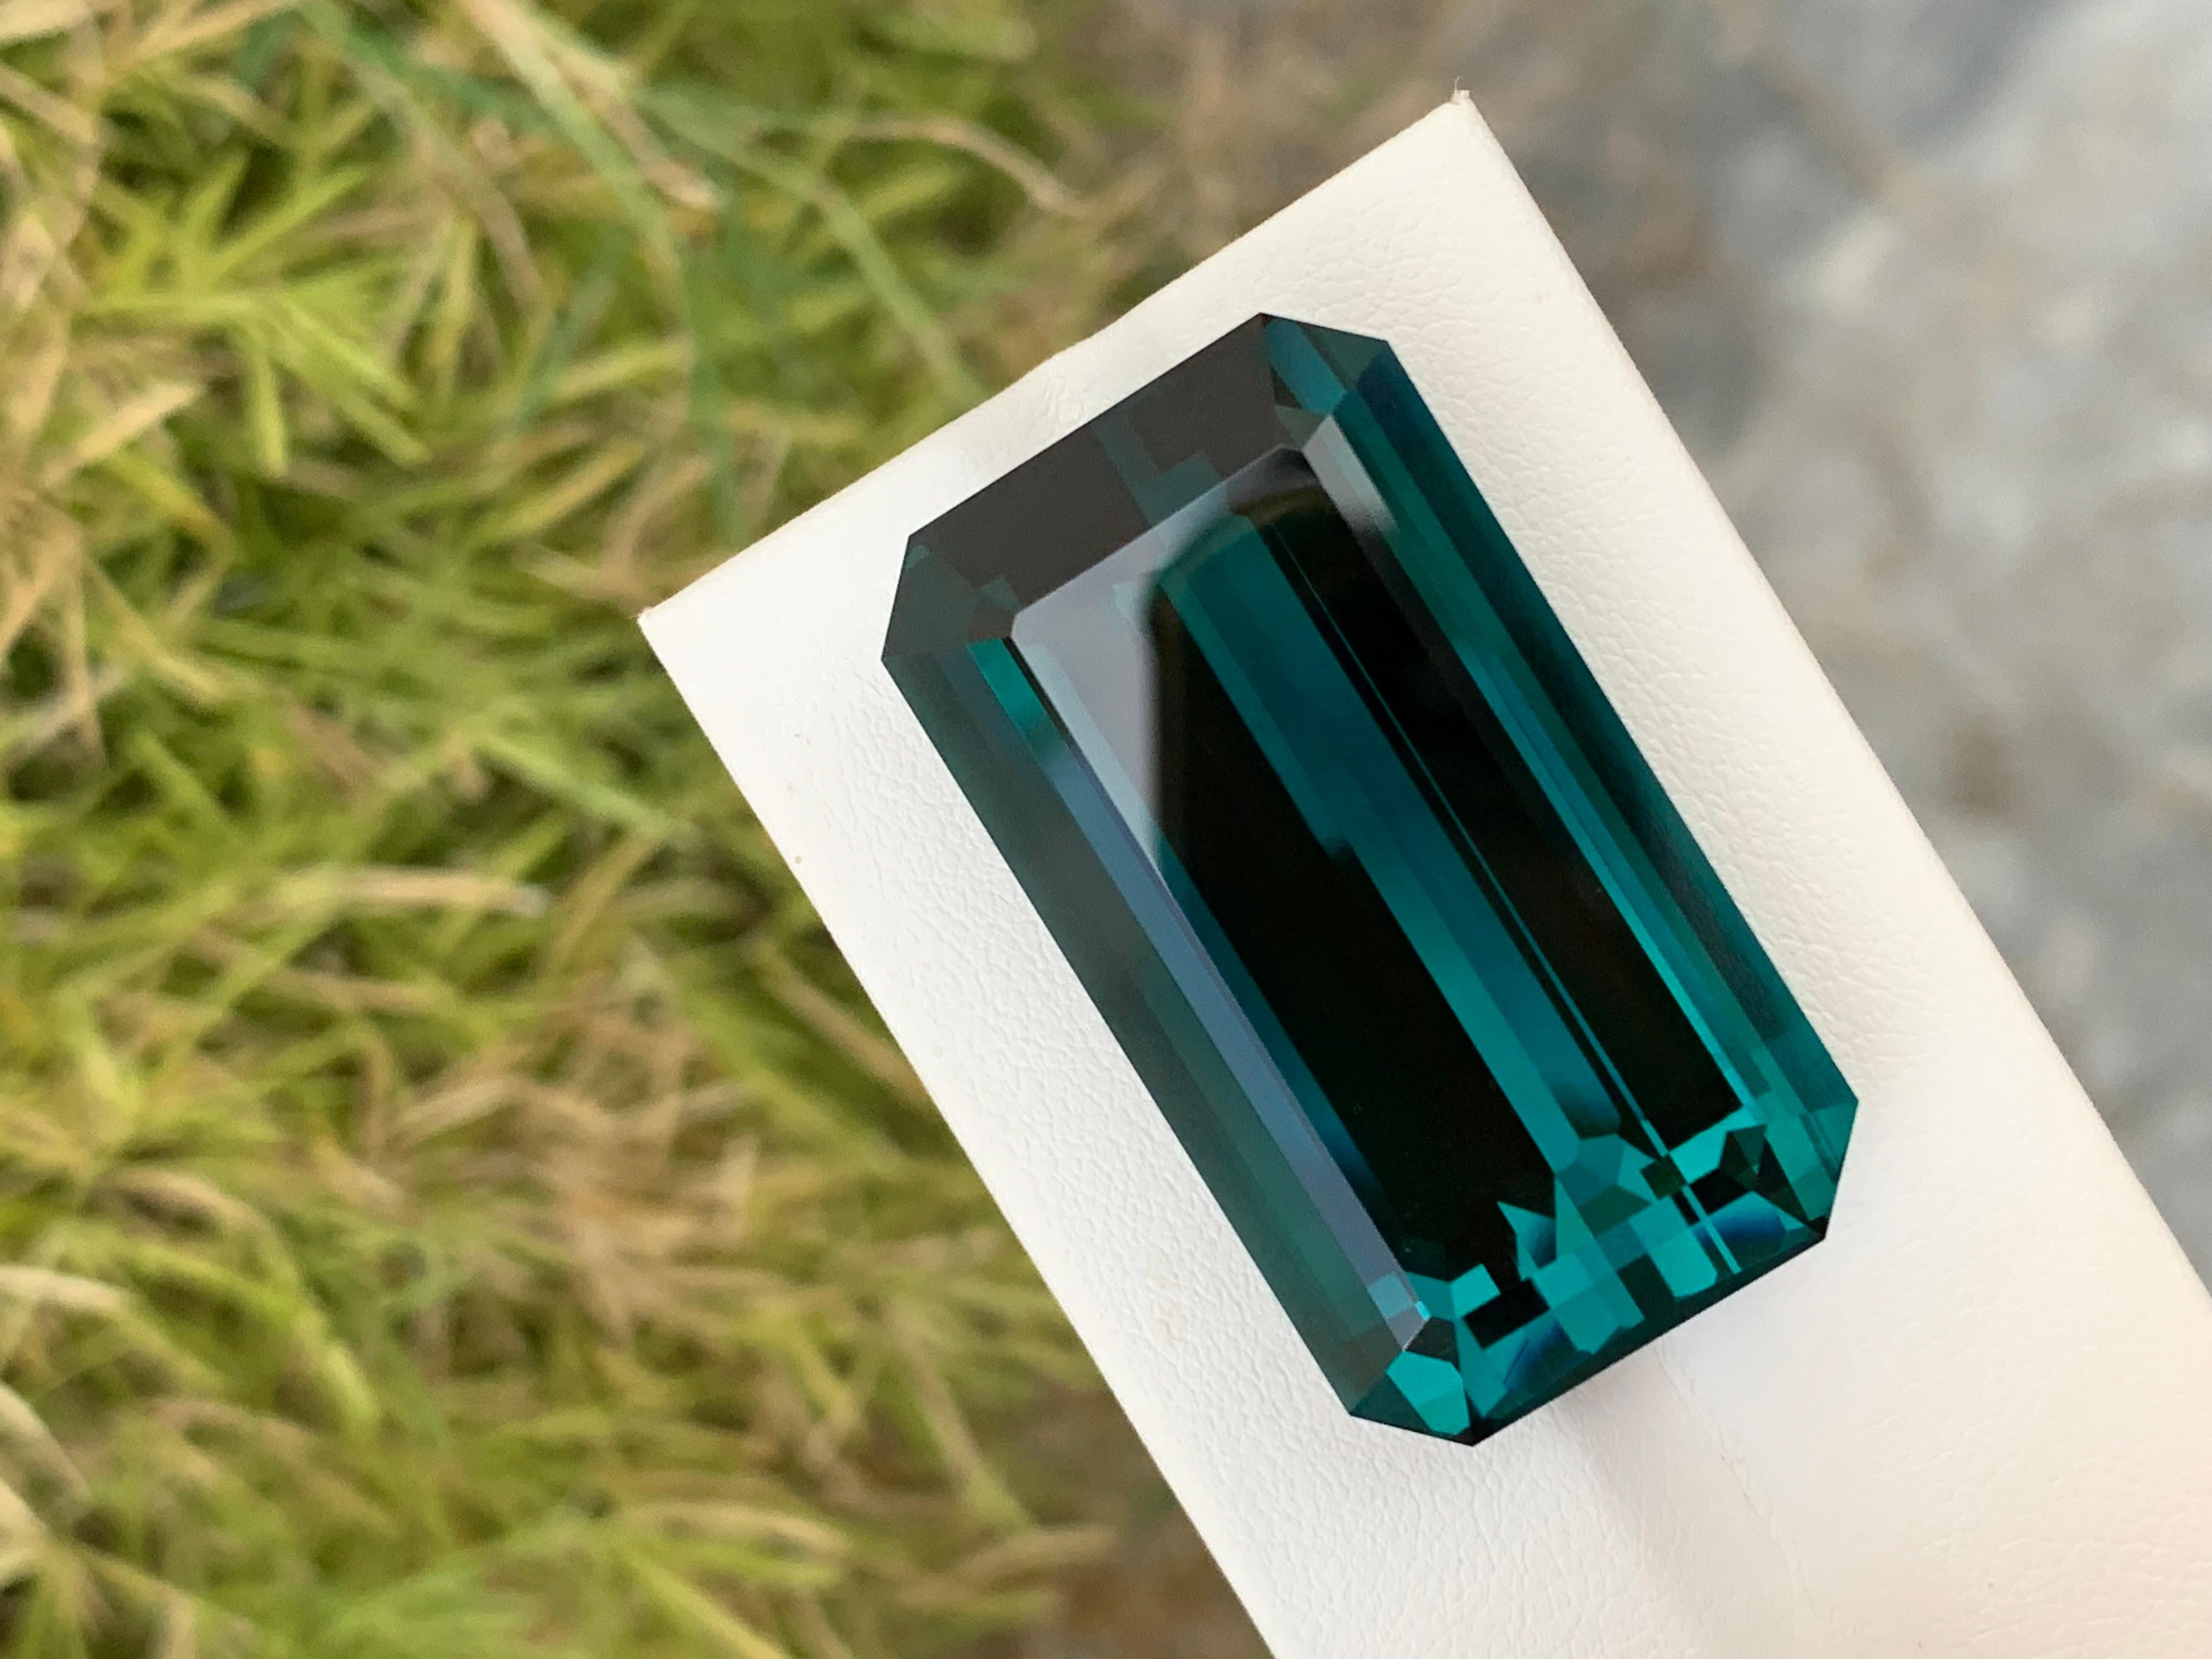 Loose Indicolite Tourmaline
Weight: 77.50 Carats
Dimension: 35 x 19.4 x 12.9 Mm
Colour: Blue
Origin: Afghanistan
Treatment: Non
Certificate: On Demand

Indicolite tourmaline, prized for its stunning blue hues ranging from serene sky blues to deep